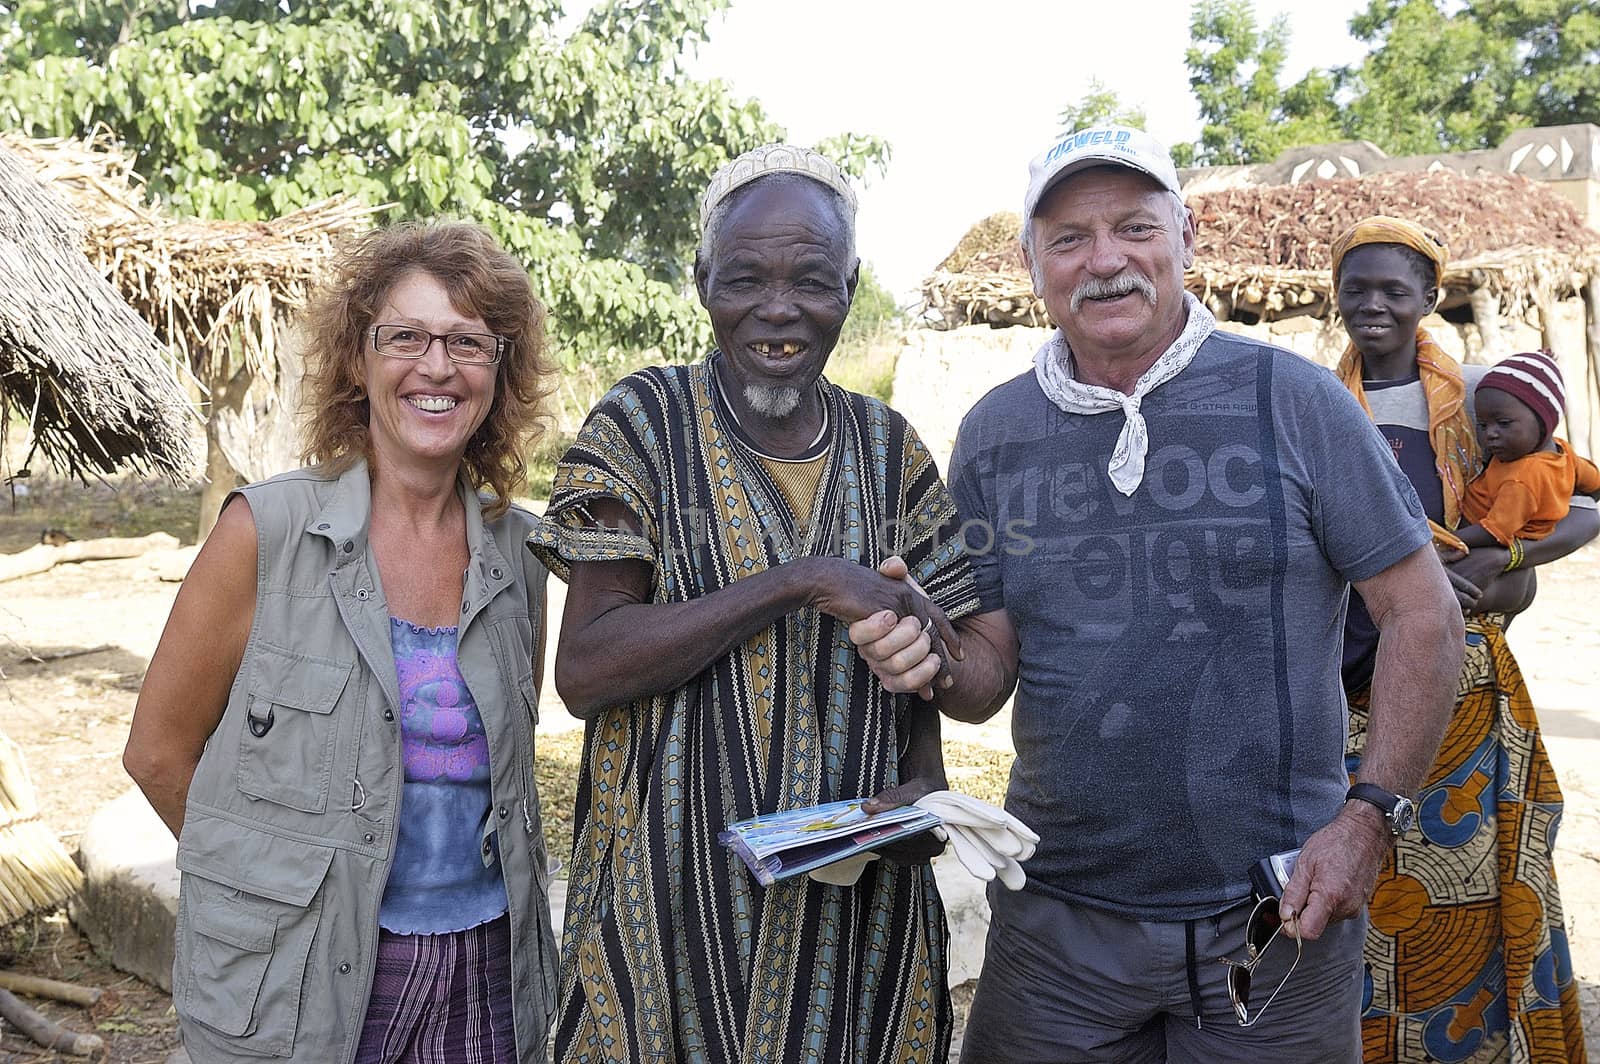 two French tourists makes a visit to a village in Burkina Faso